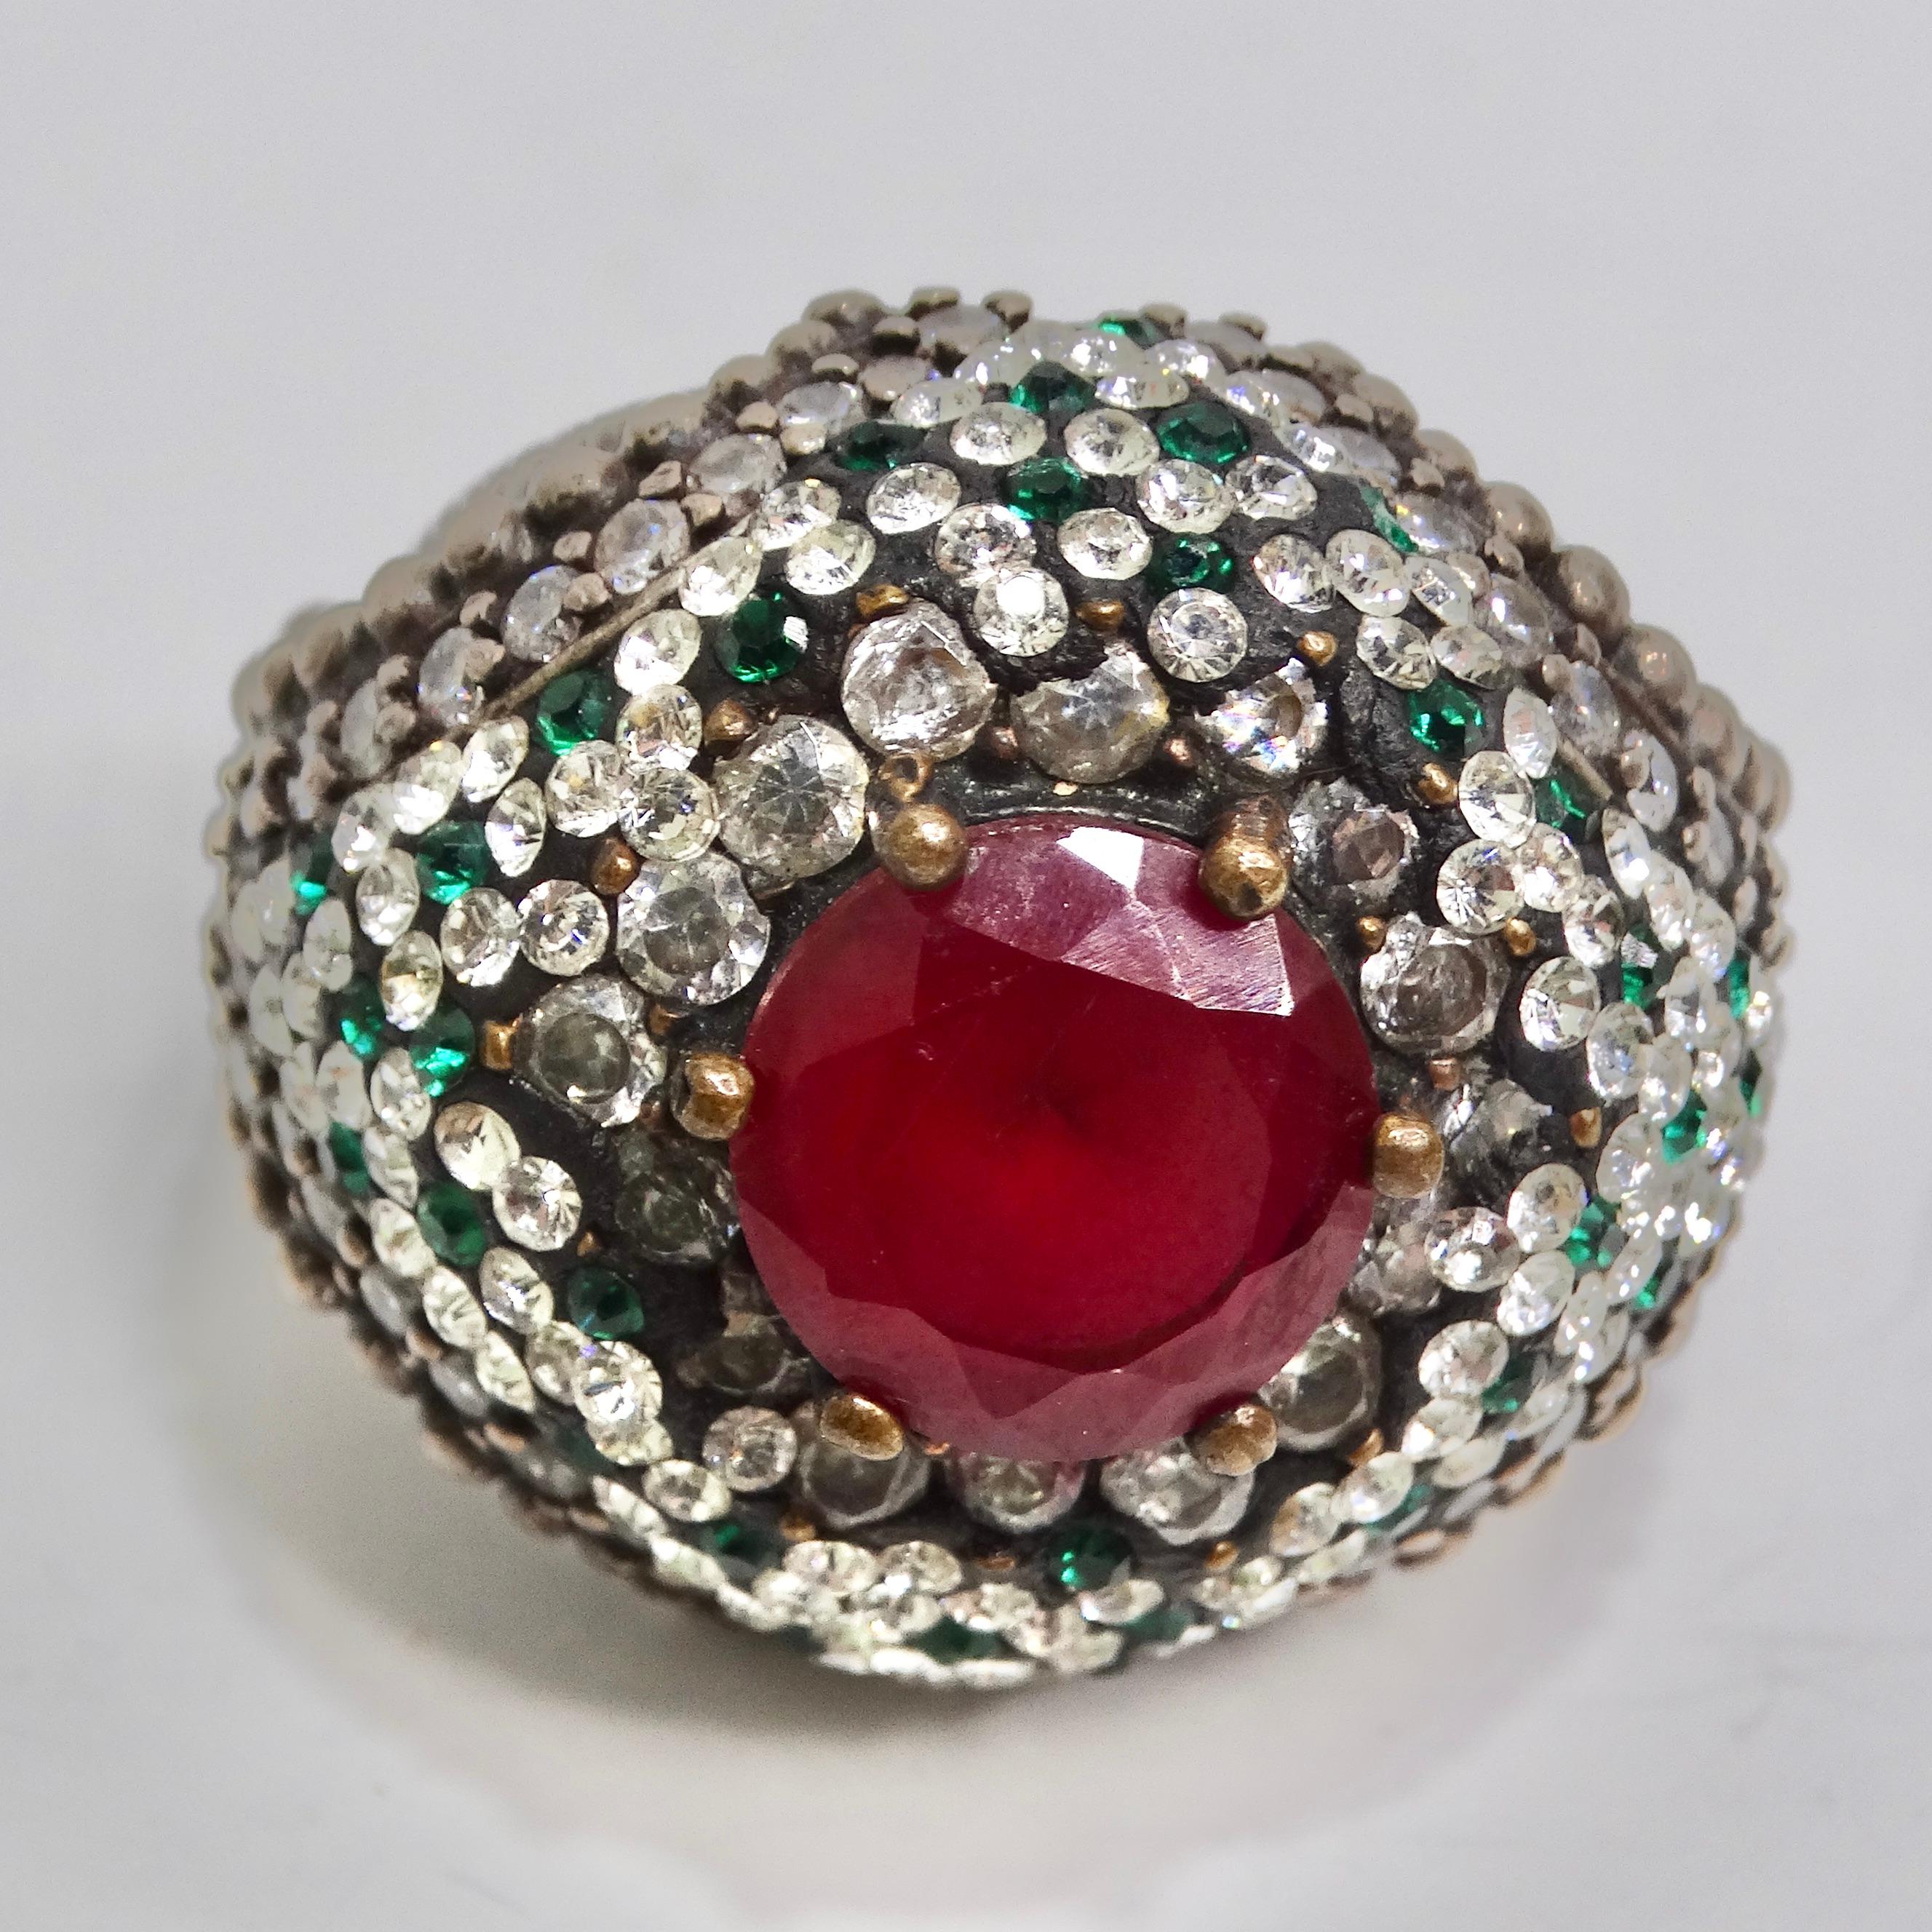 Introducing our sensational 1980s Silver 925 Synthetic Ruby Ring, a dazzling and glamorous piece that embodies the bold and extravagant style of the 1980s. Crafted with meticulous attention to detail, this ring is a true statement cocktail ring that